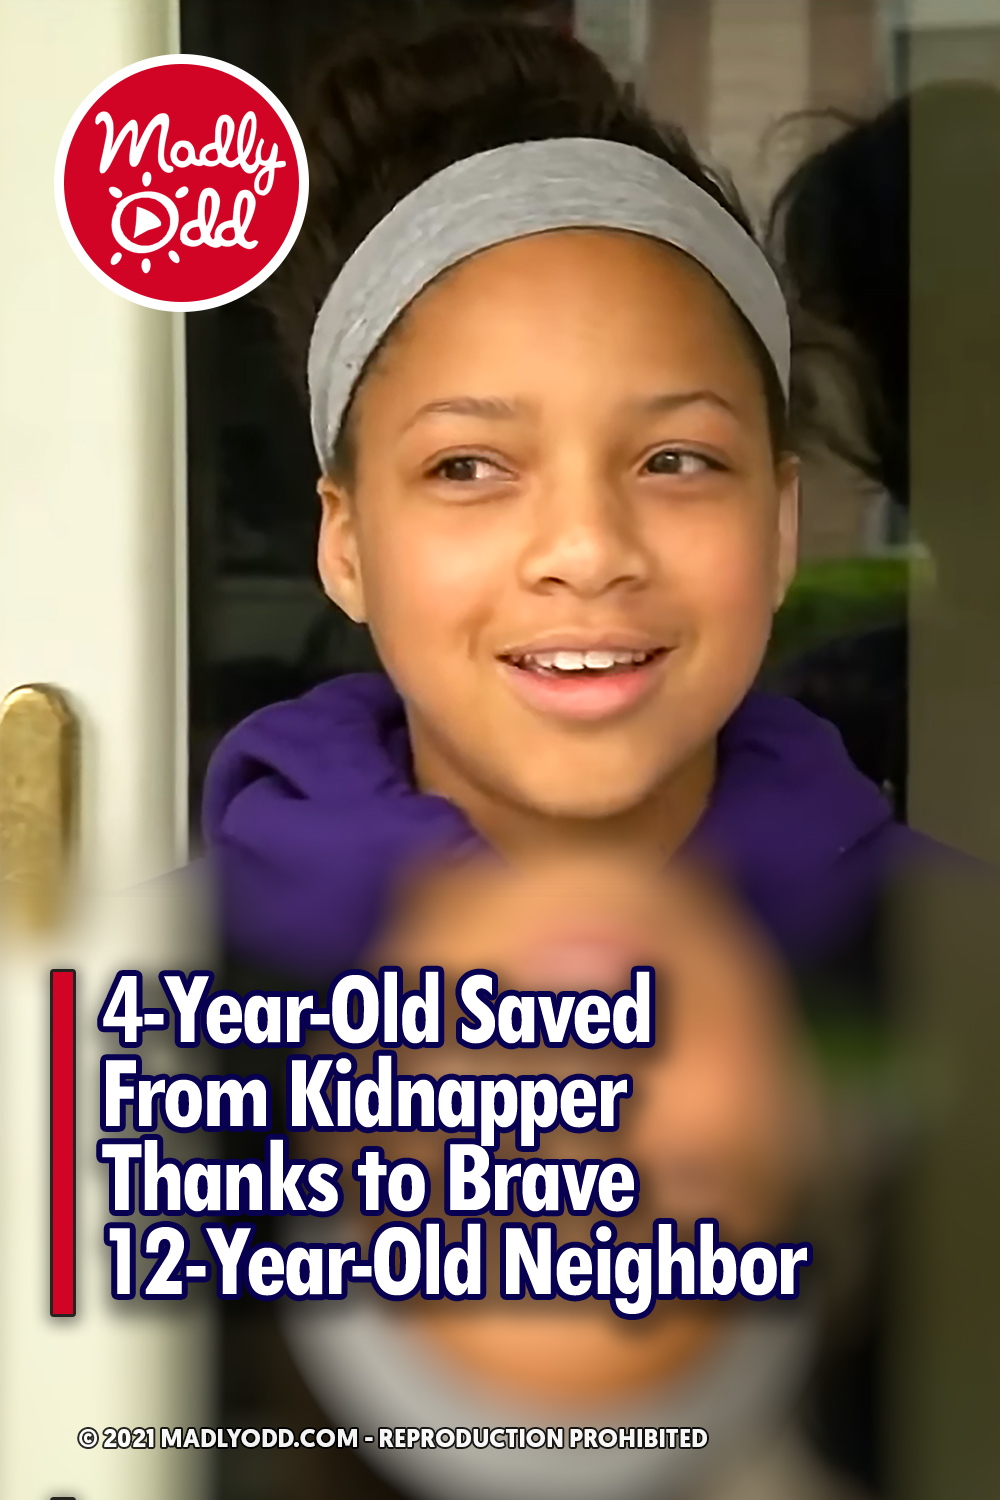 4-Year-Old Saved From Kidnapper Thanks to Brave 12-Year-Old Neighbor